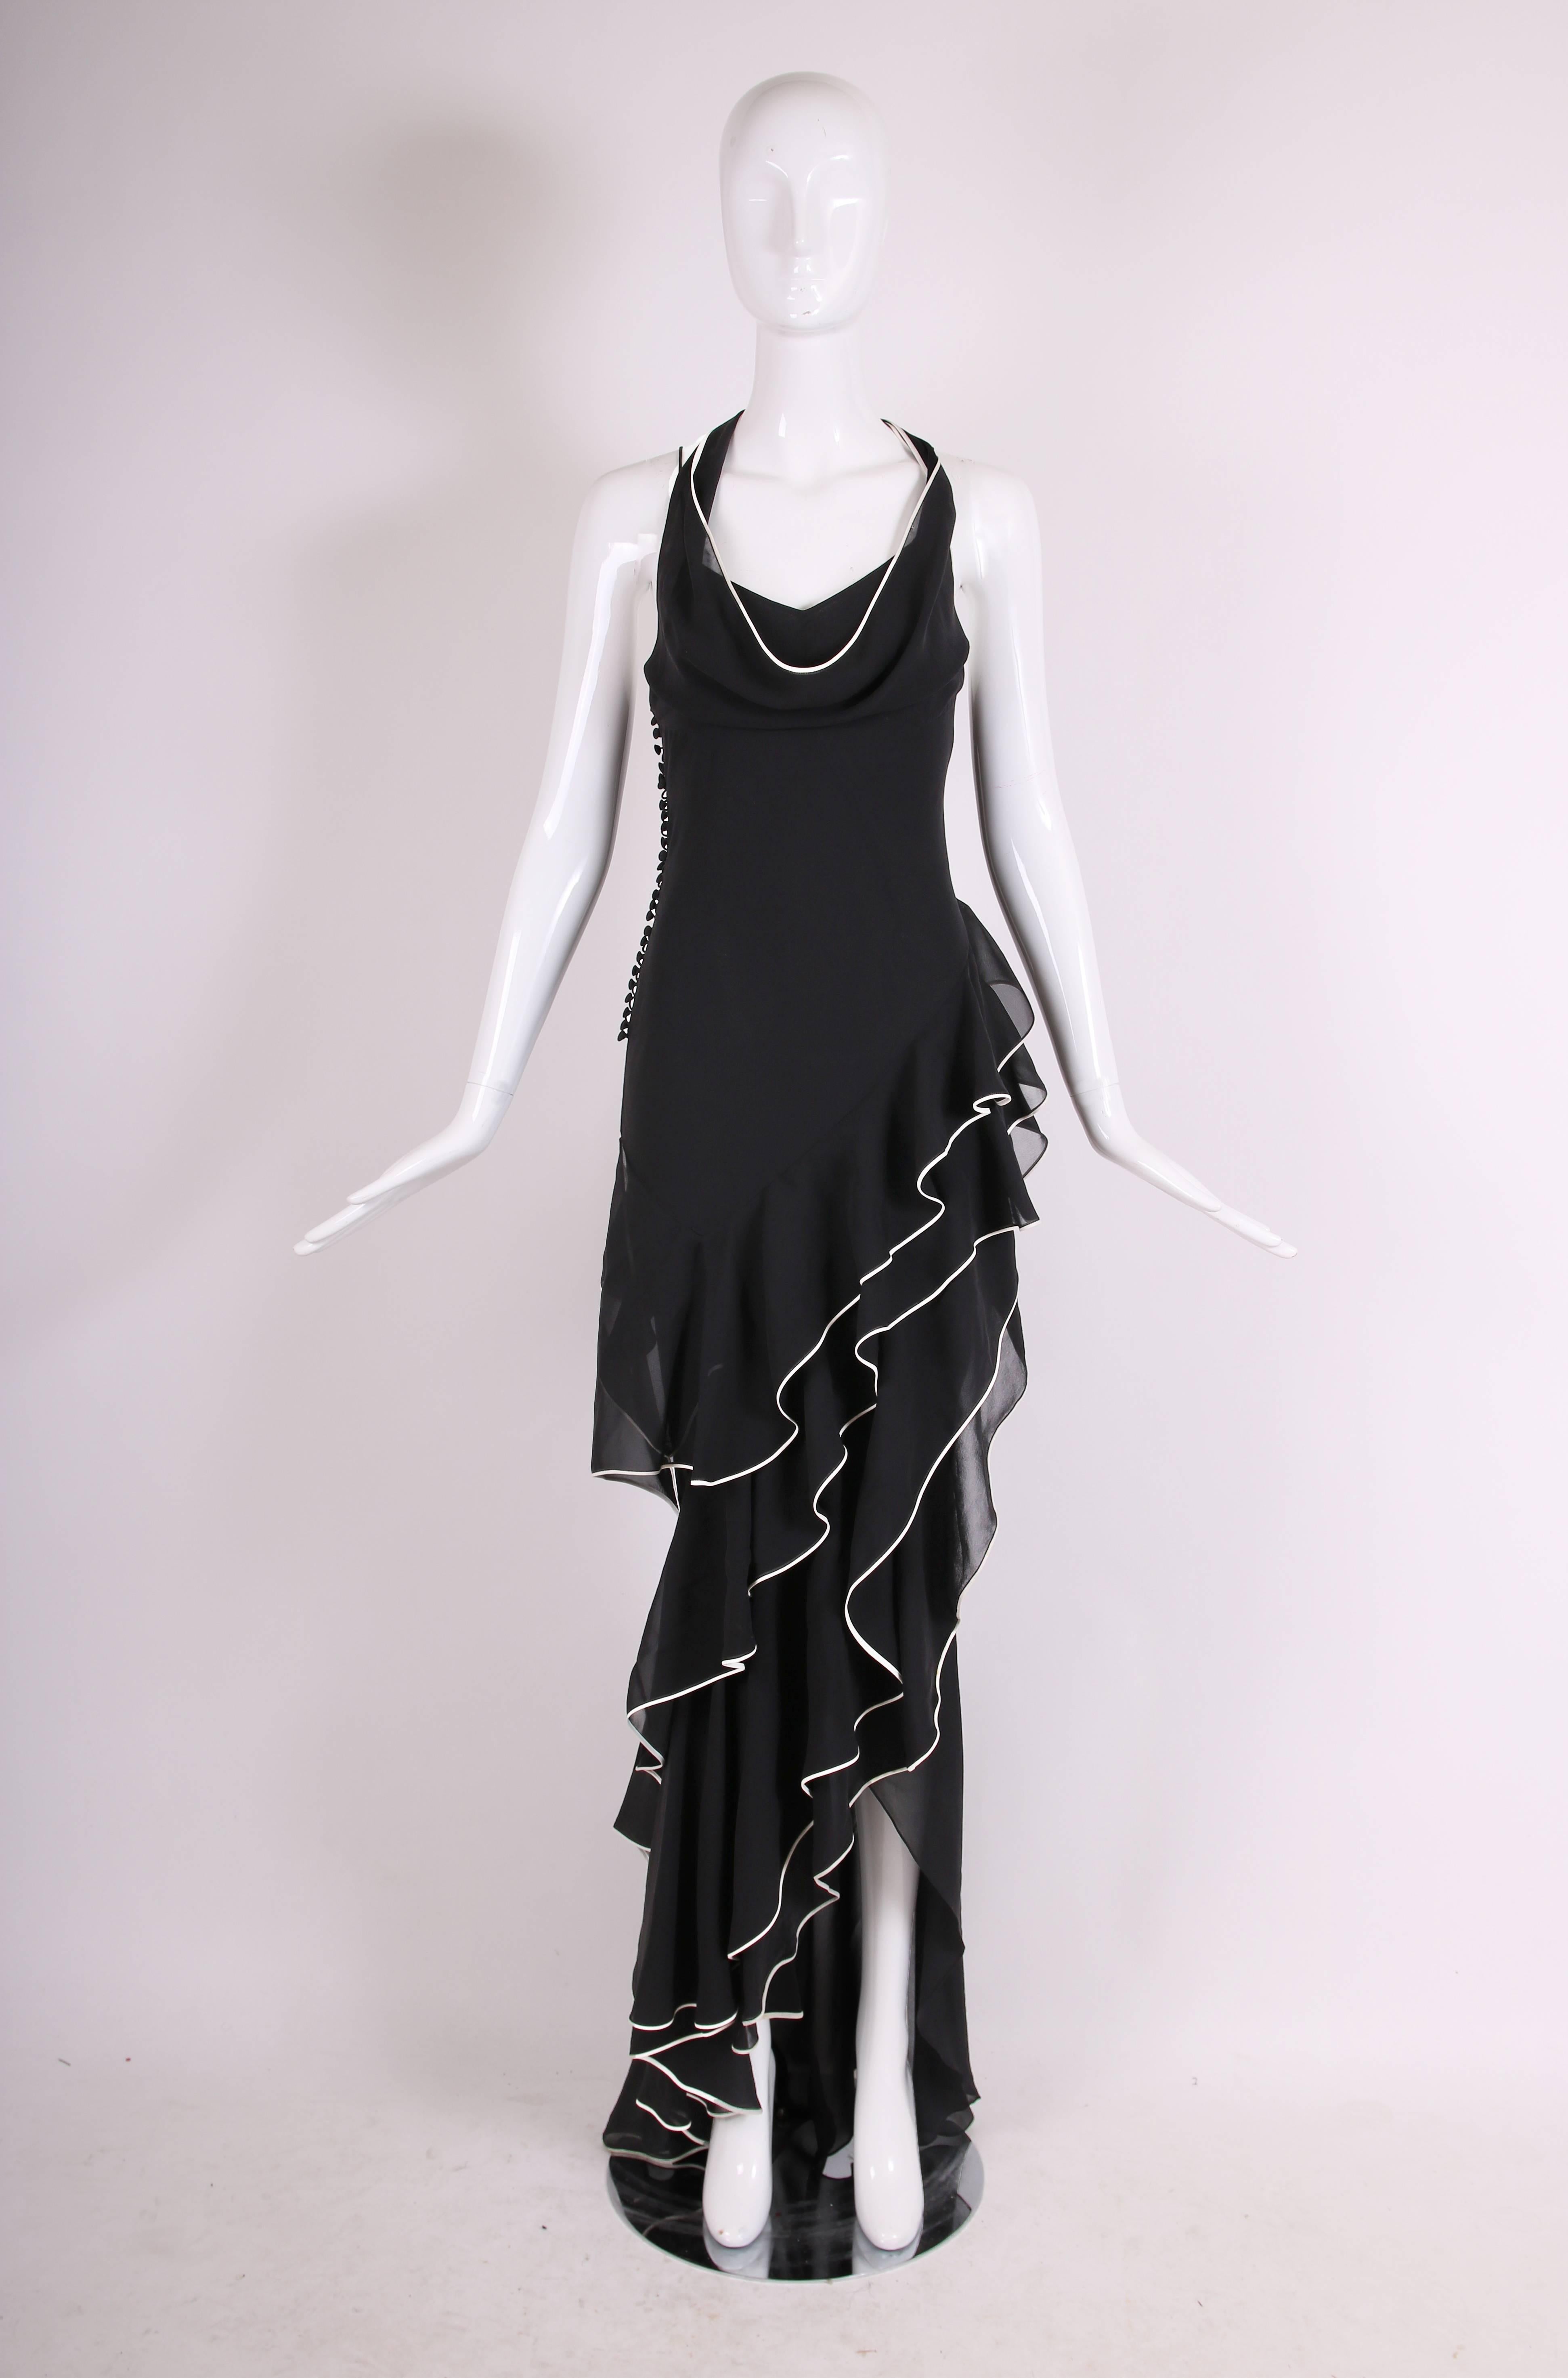 2005 Christian Dior by John Galliano black silk crepe chiffon evening gown with creme piping, featuring four layers of bias-cut ruffles at front. Bodice is double layered featuring spaghetti straps and a halter neck line. Covered button closure at